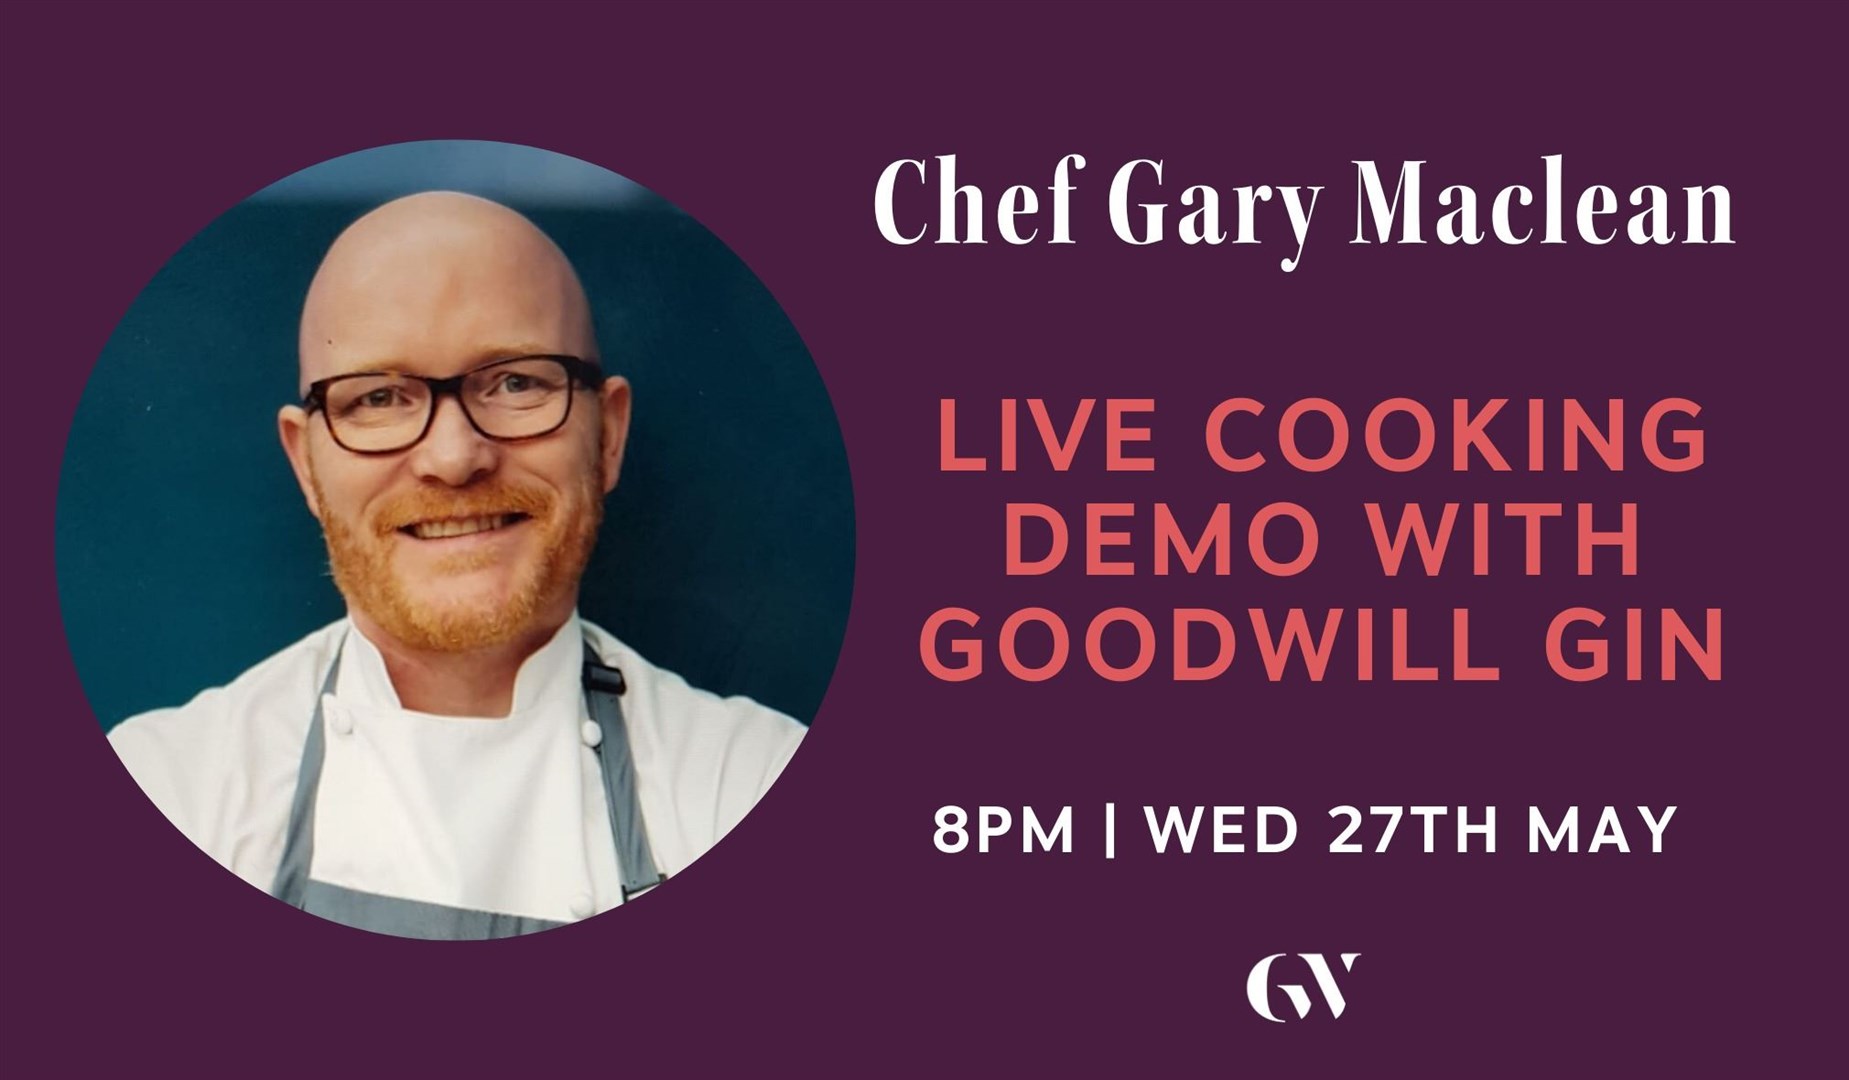 MasterChef 2016 winner Gary MacLean is preparing a live cooking with gin demo using a prime Glen Wyvis distillery product.